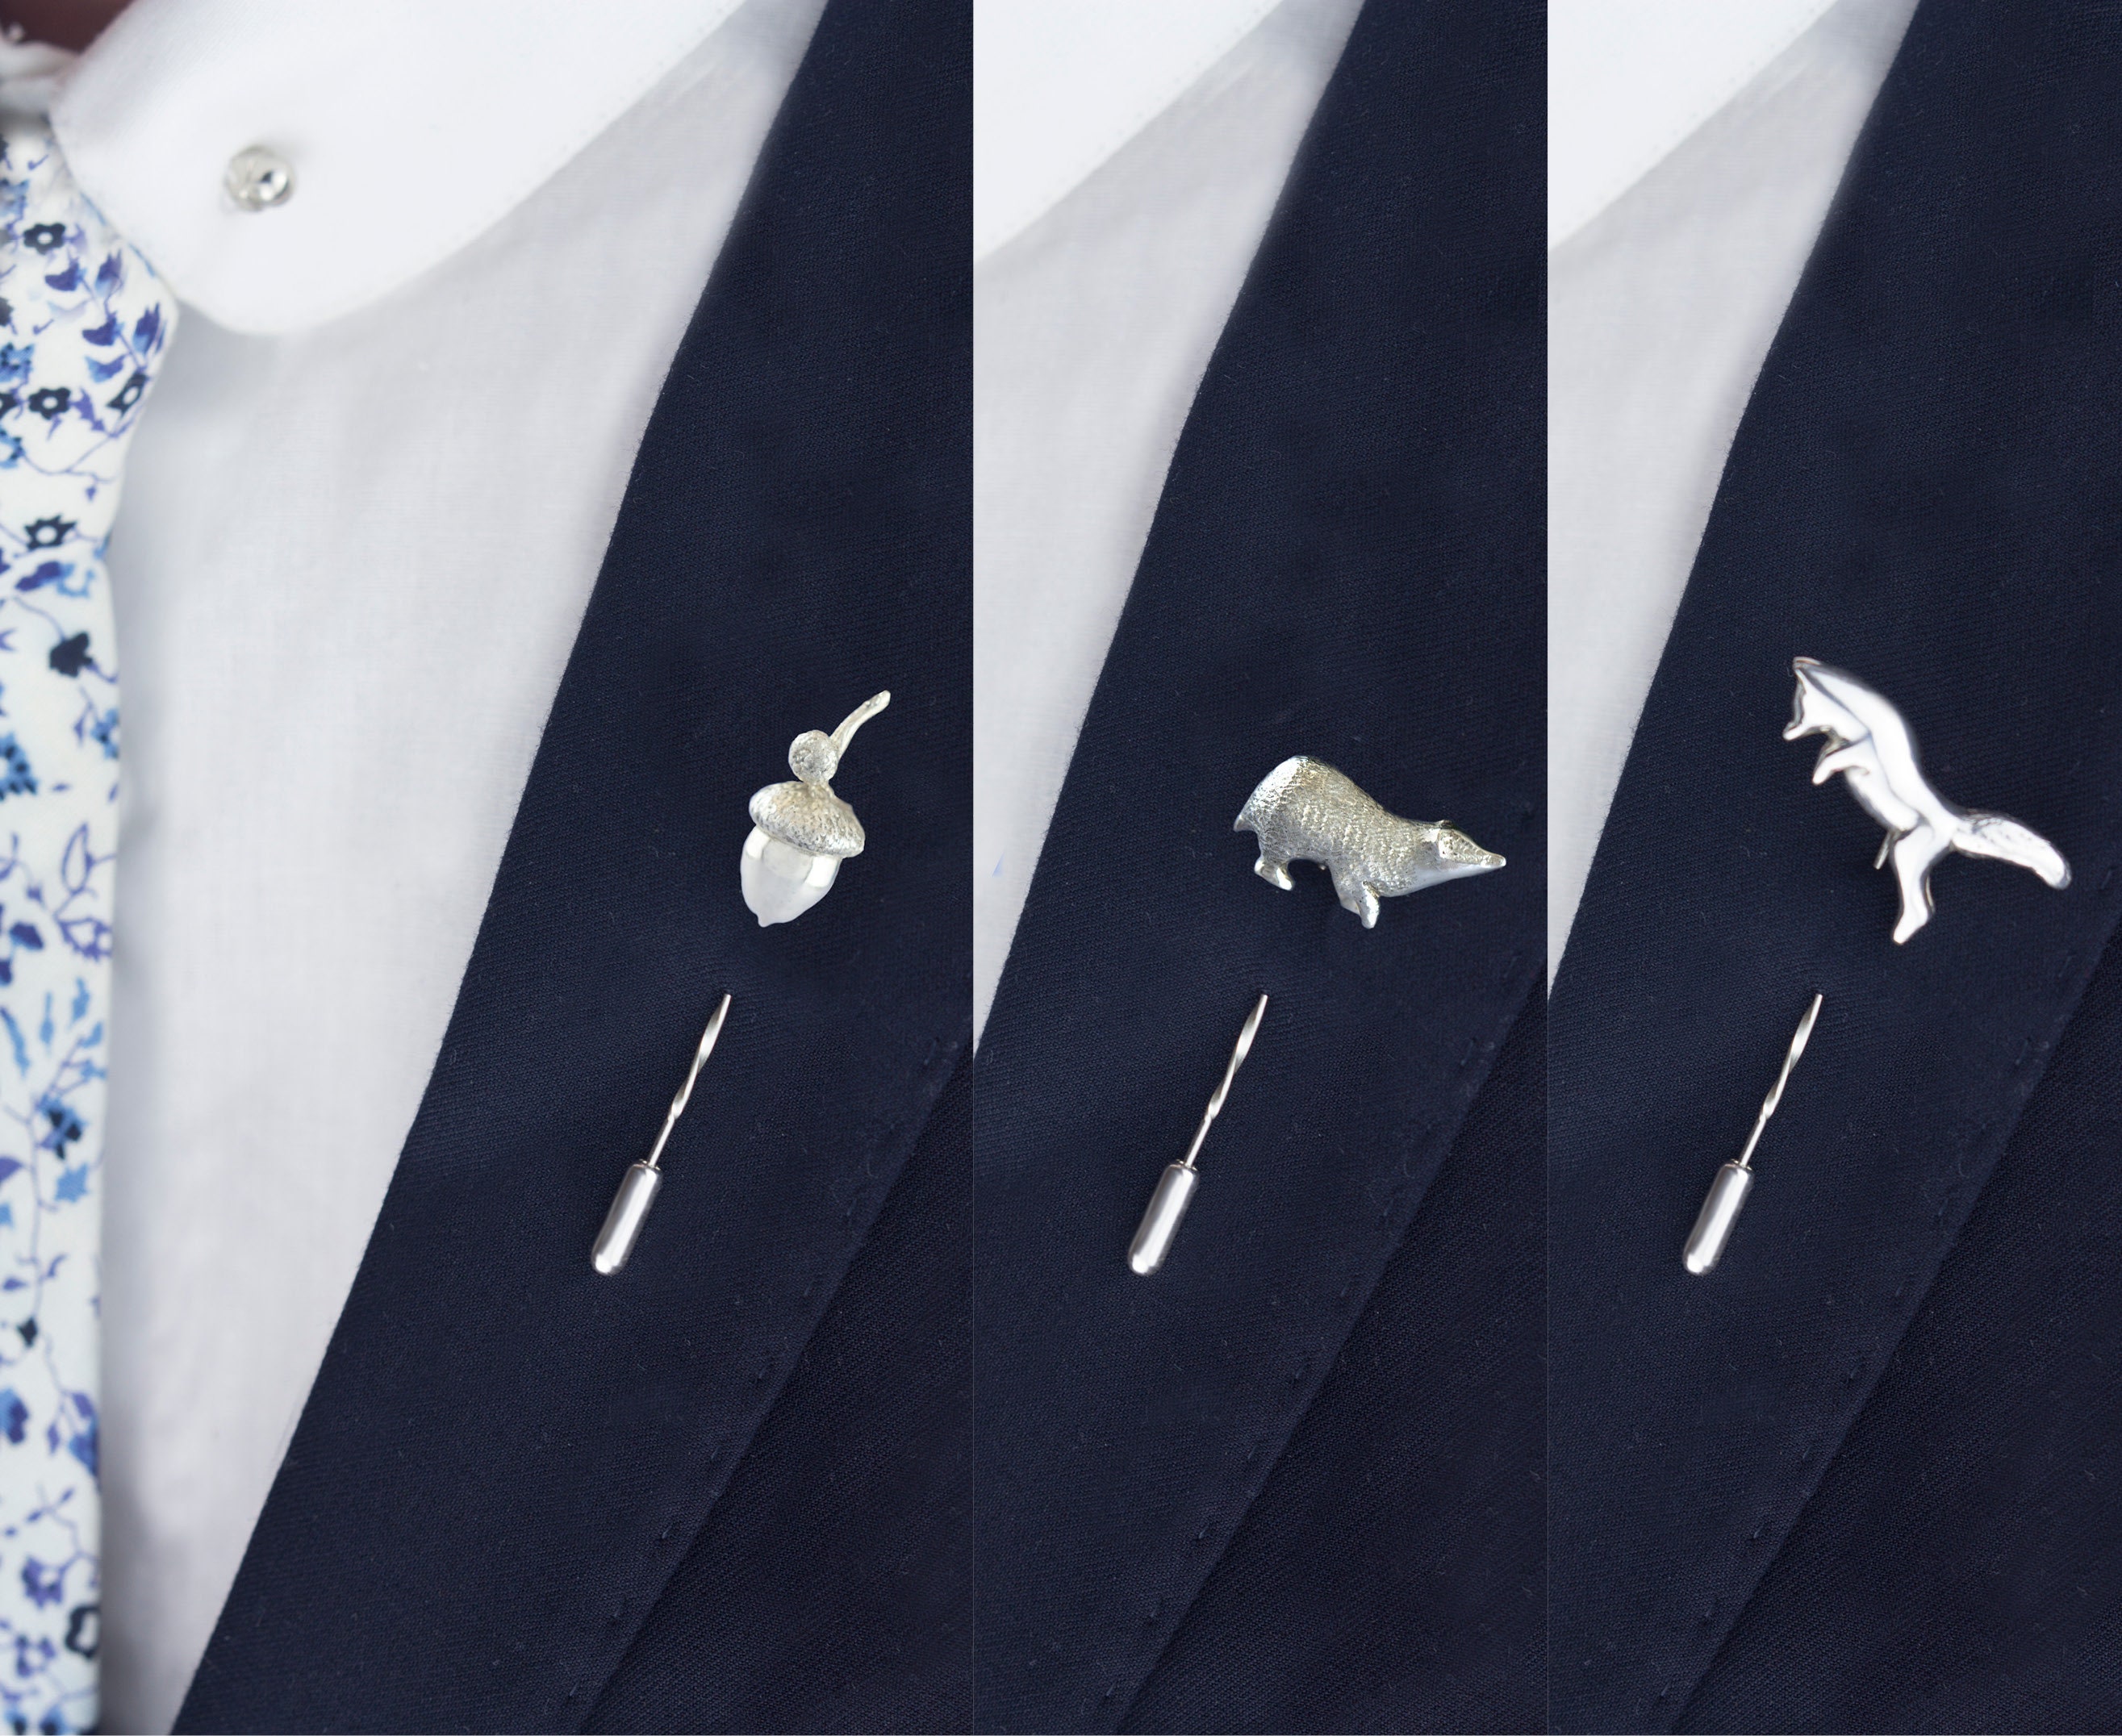 Personal Groomsmen Gift Or Unique Best Man Jewelry Animal Lapel Pin Boutonniere Alternative